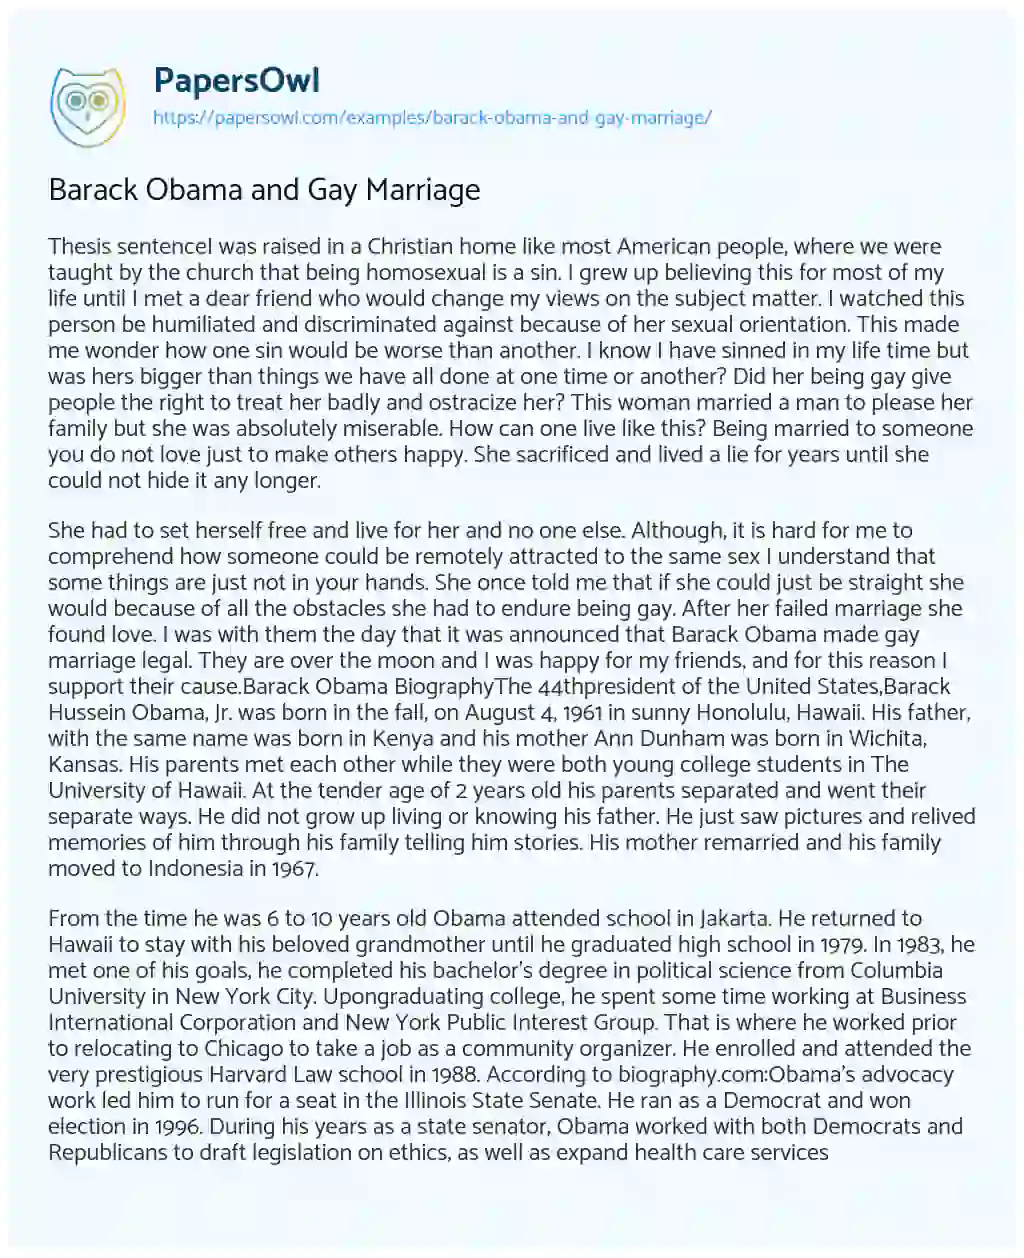 Essay on Barack Obama and Gay Marriage